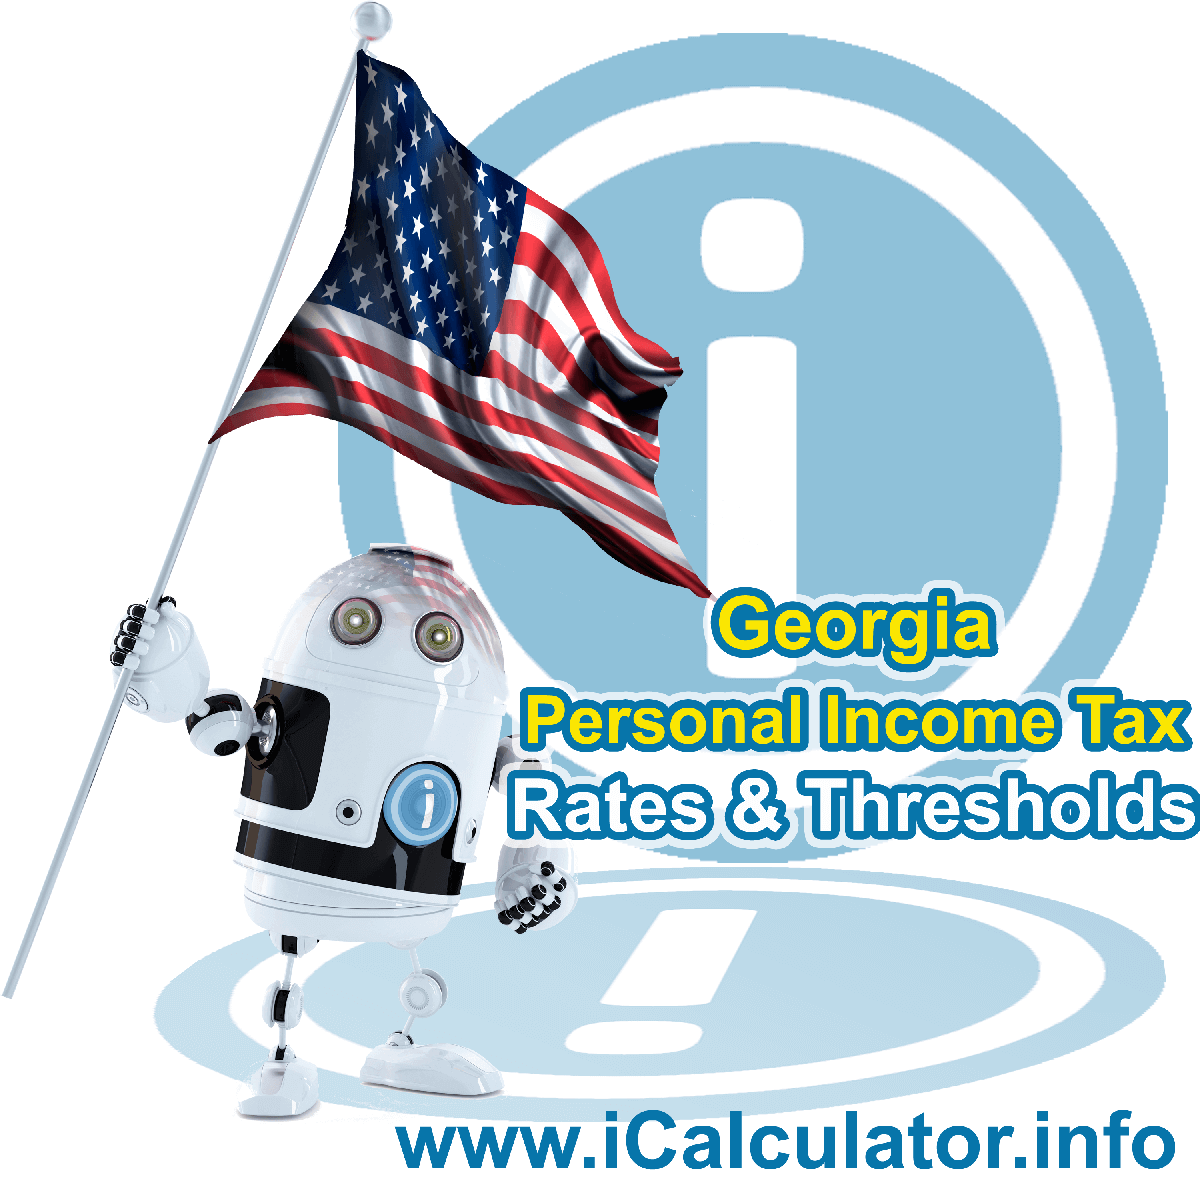 Georgia State Tax Tables 2013. This image displays details of the Georgia State Tax Tables for the 2013 tax return year which is provided in support of the 2013 US Tax Calculator